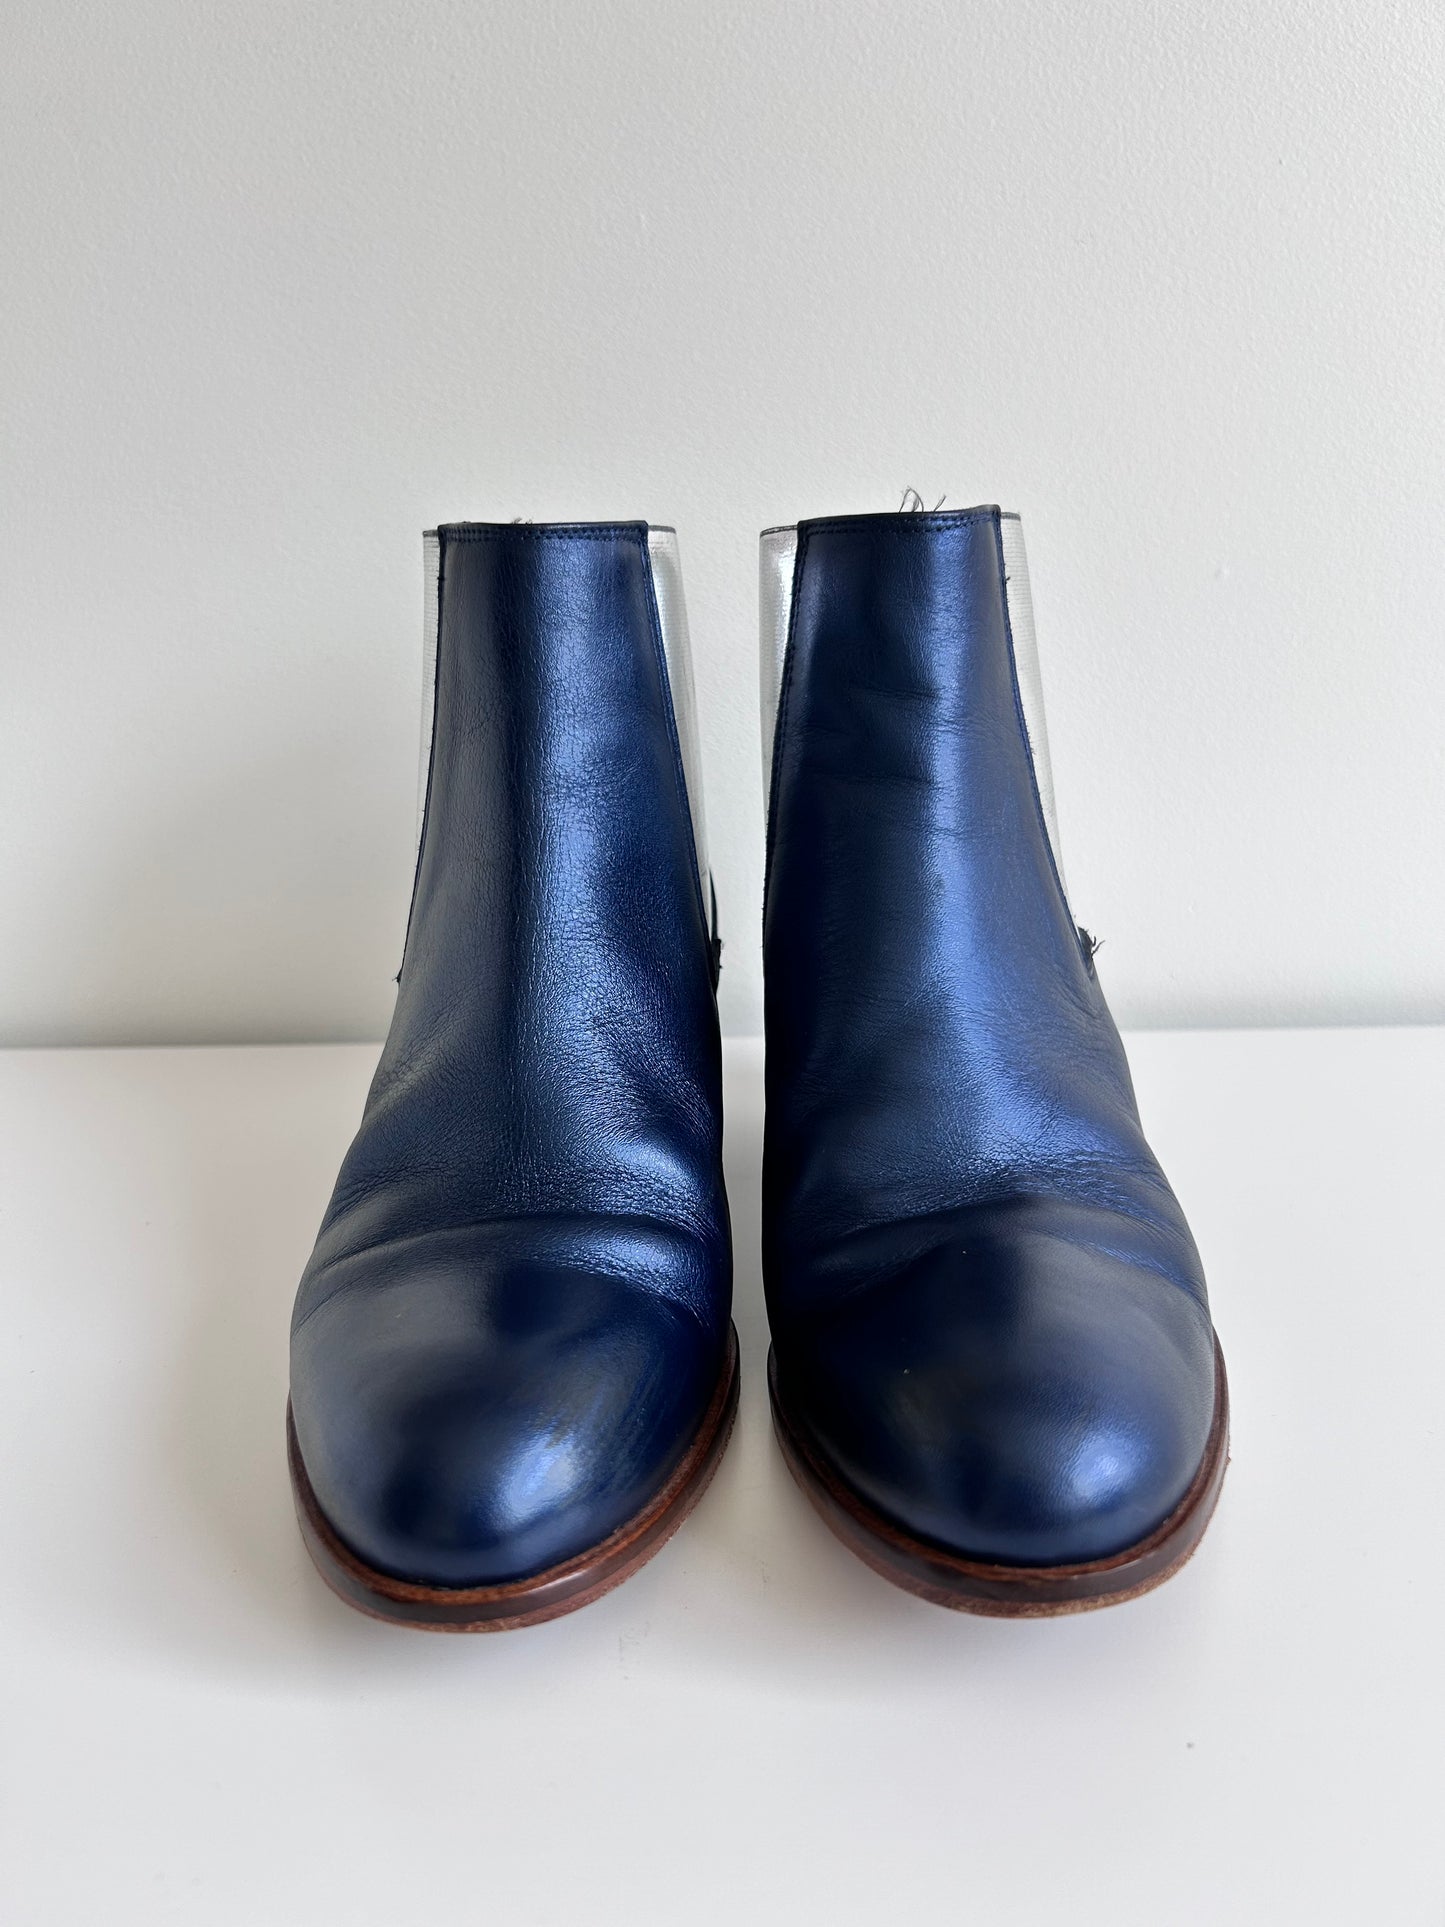 Beau Coop boots - size 37